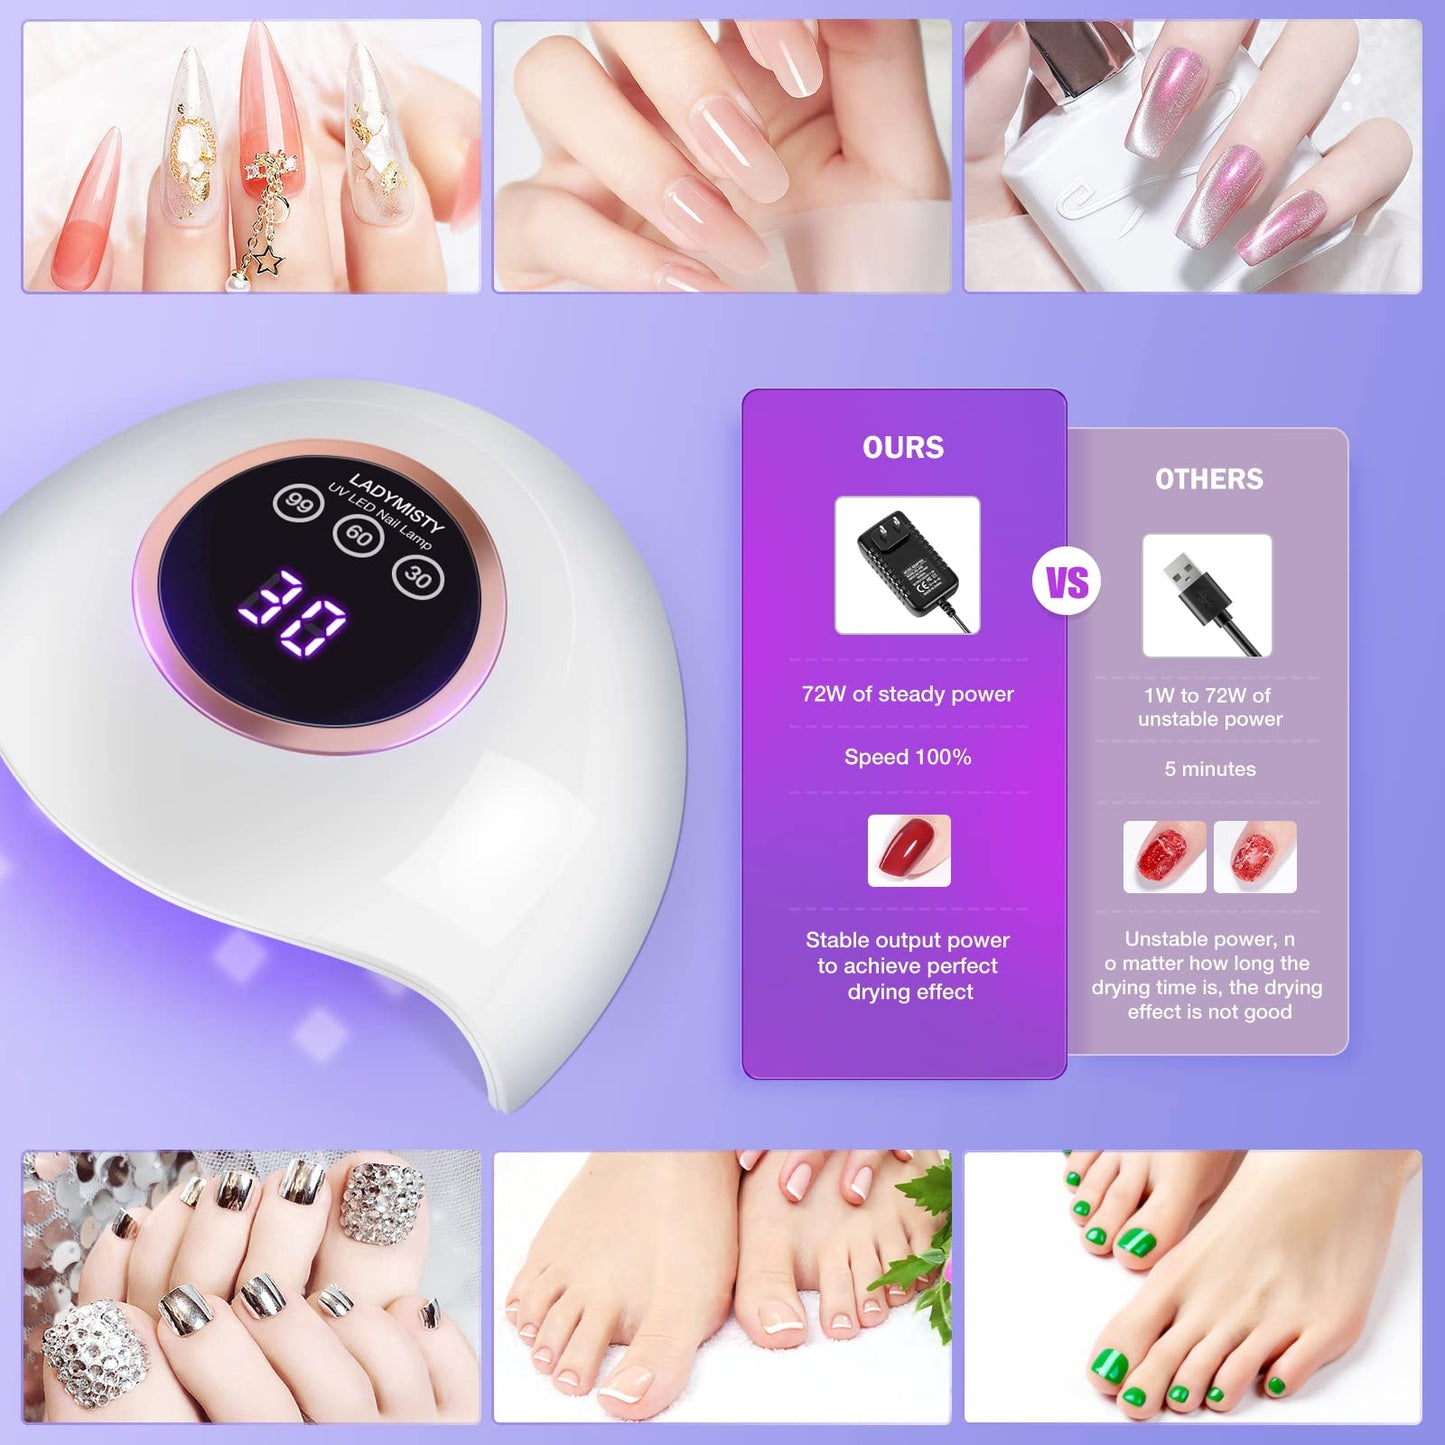 LadyMisty 72W UV LED Nail Lamp Light Dryer for Nails Gel Polish with 18 Beads 3 Timer Setting & LCD Touch Display Screen, Auto Sensor, Professional Nails, White……